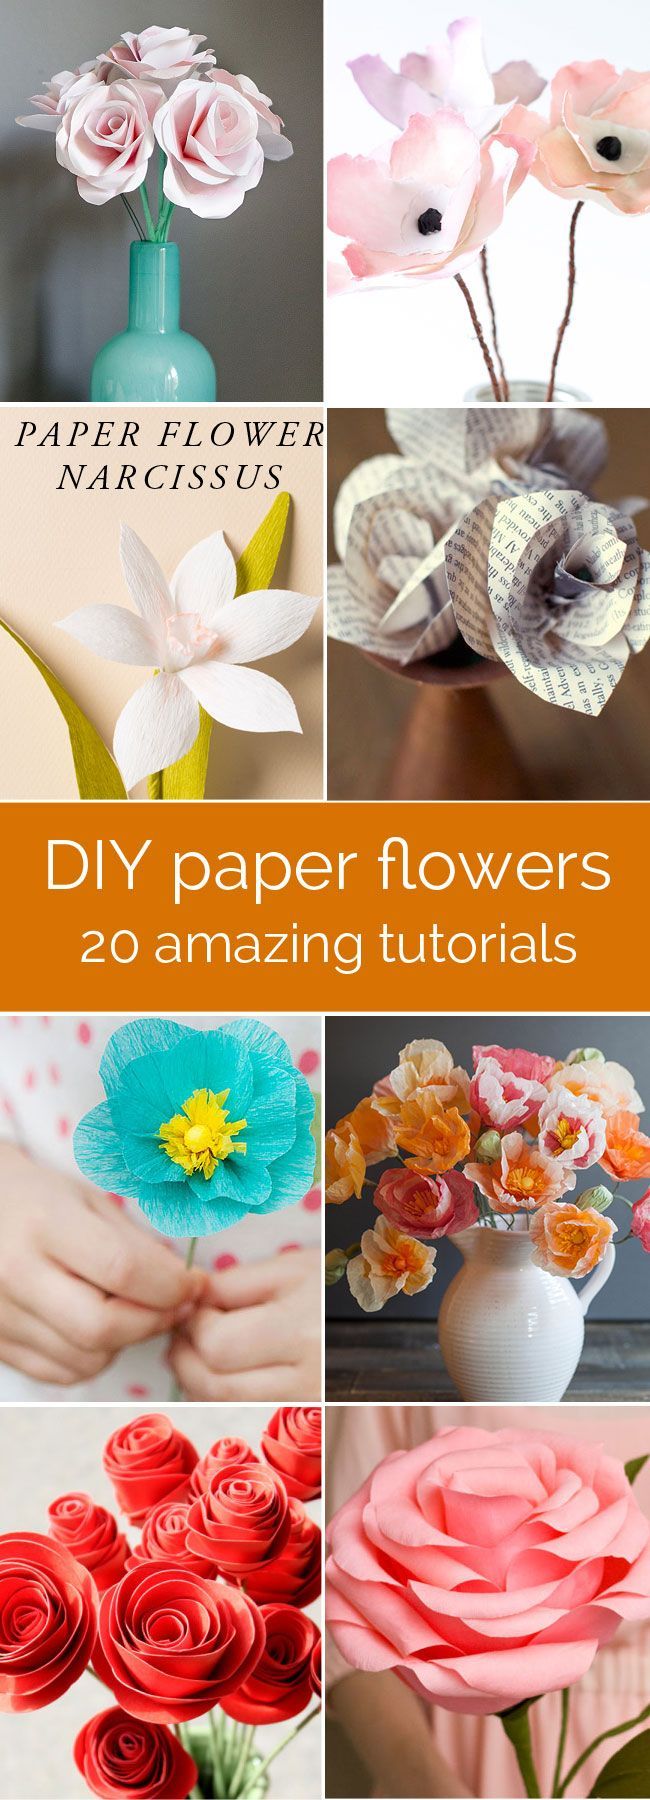 amazing collection of DIY paper flower tutorials – these look so real! perfect for weddings, parties, or just home decor. all with